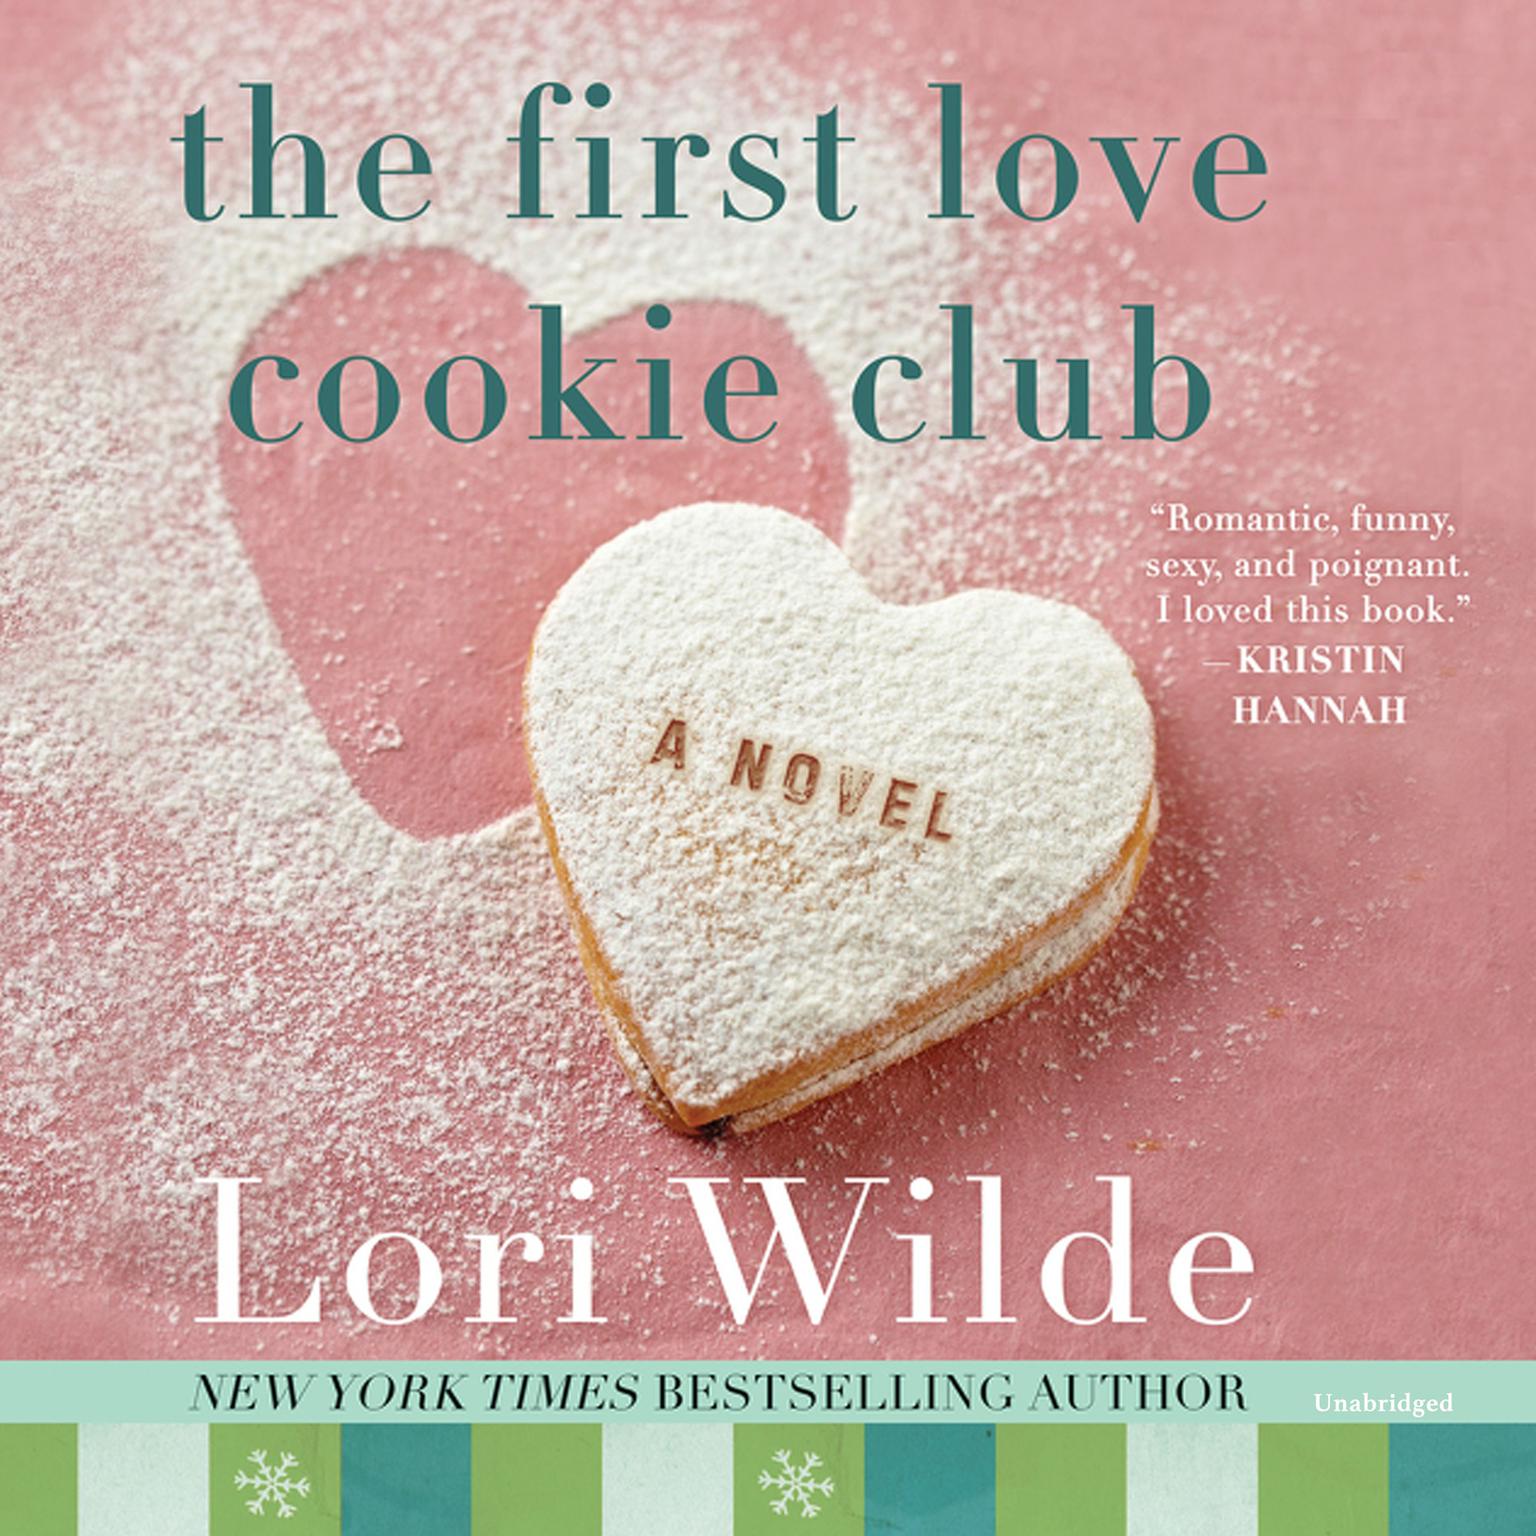 The First Love Cookie Club Audiobook, by Lori Wilde